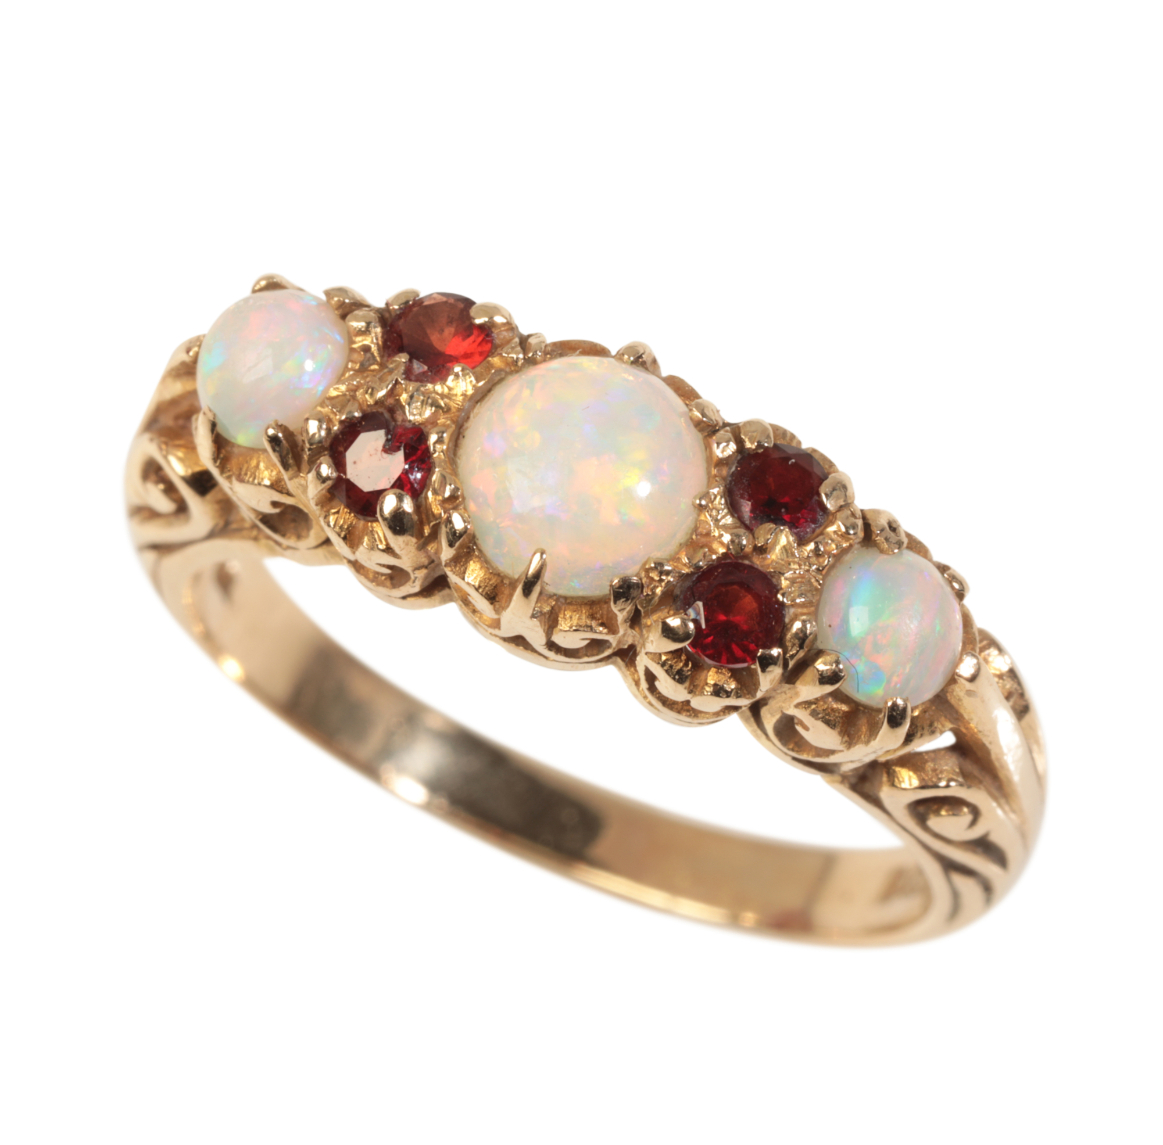 A VINTAGE OPAL AND GARNET RING